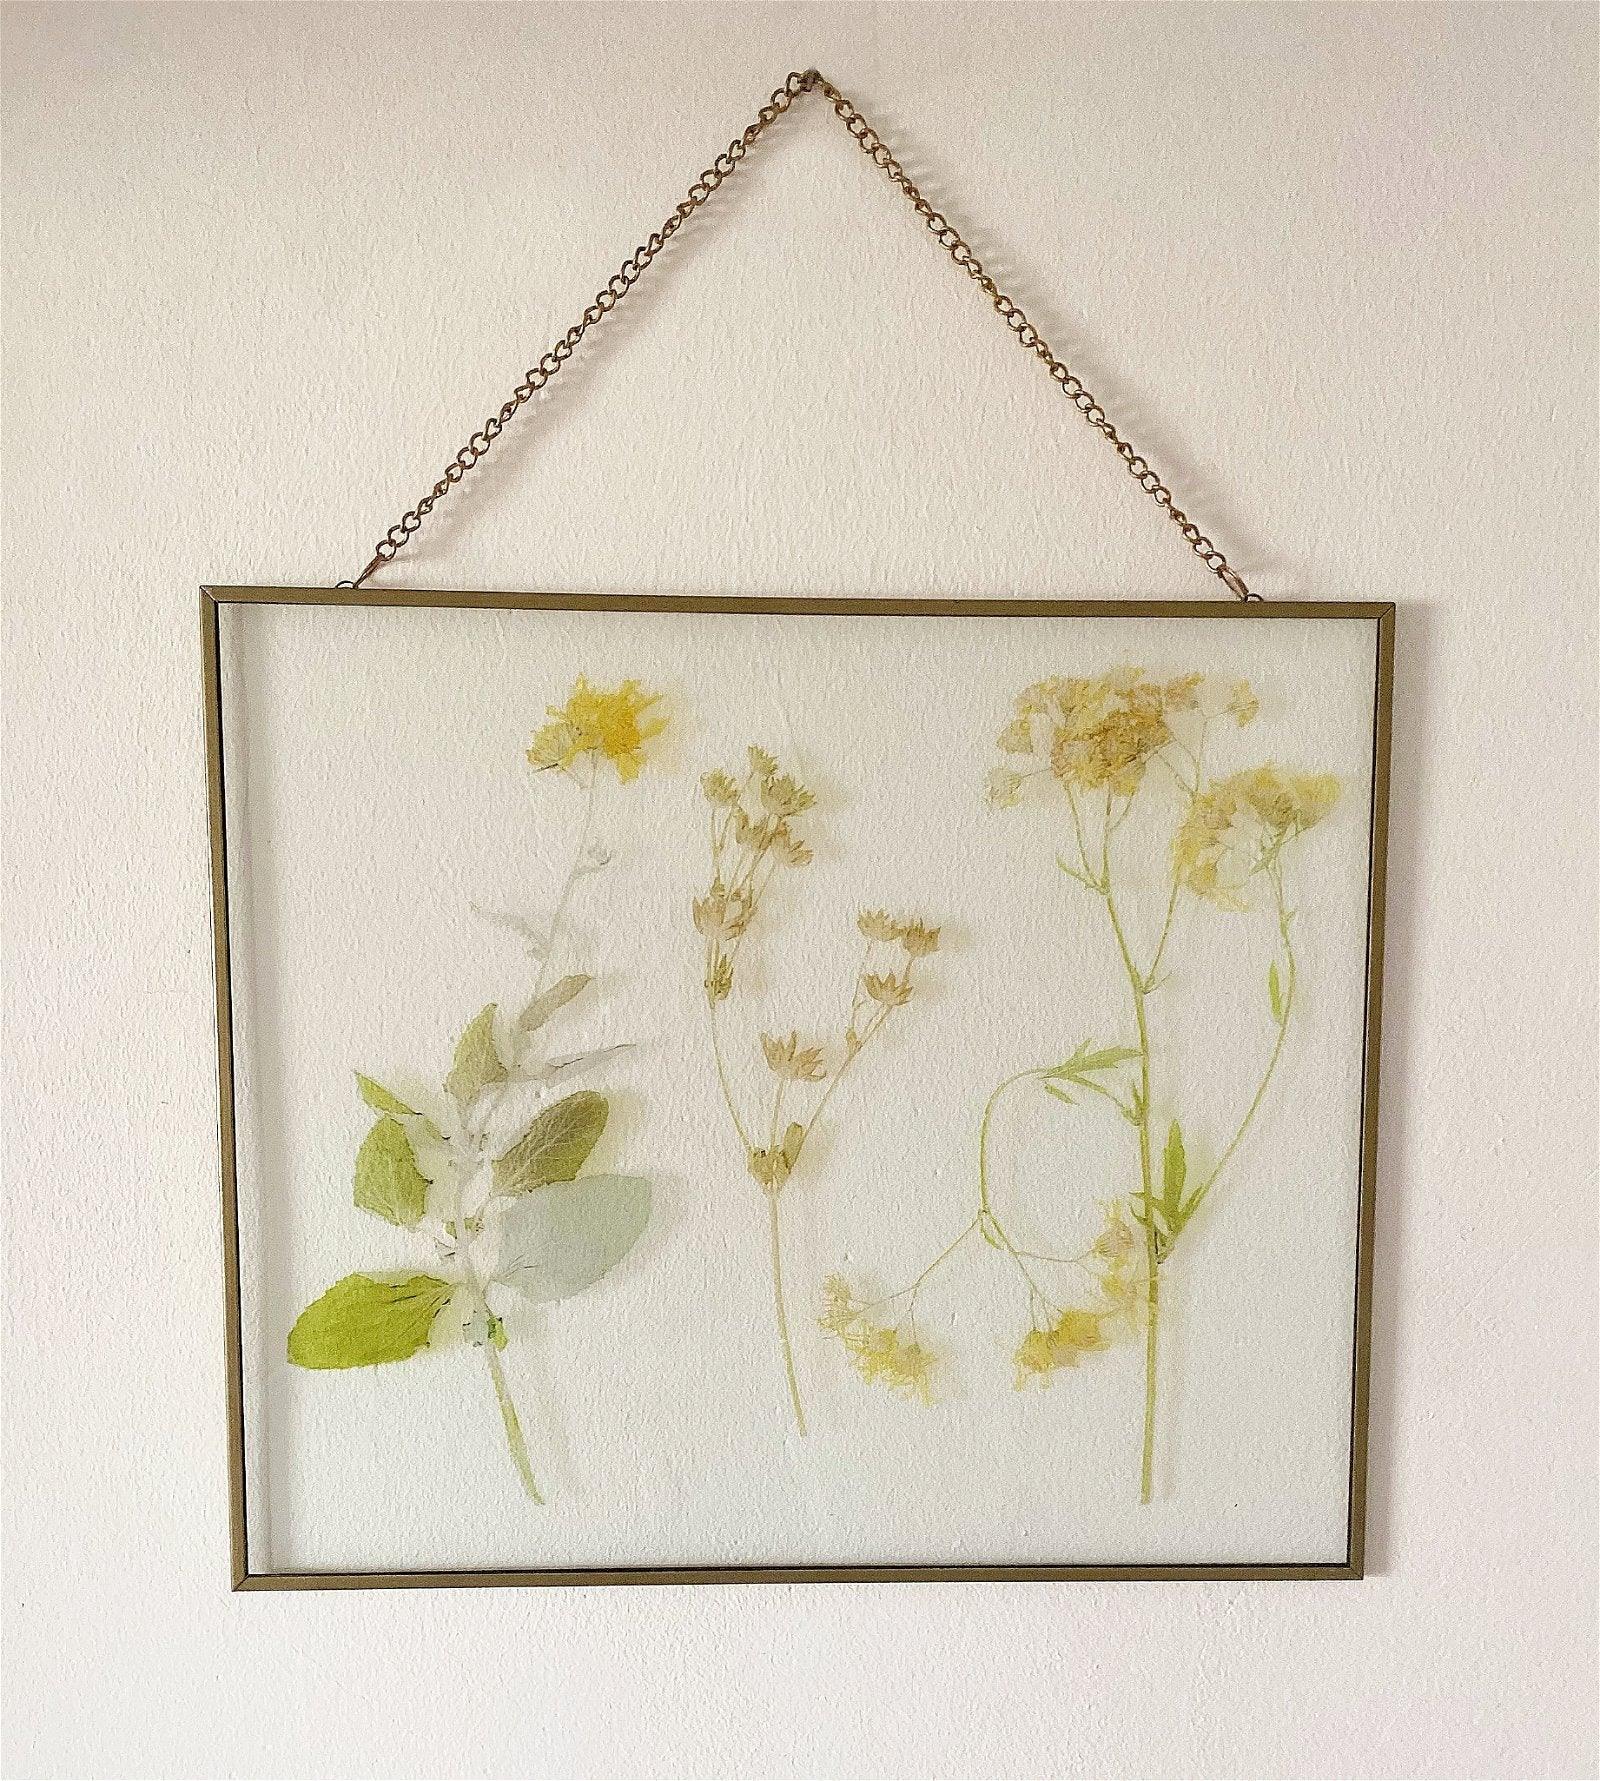 View Les Fleurs Flower Wall Hanging Picture information